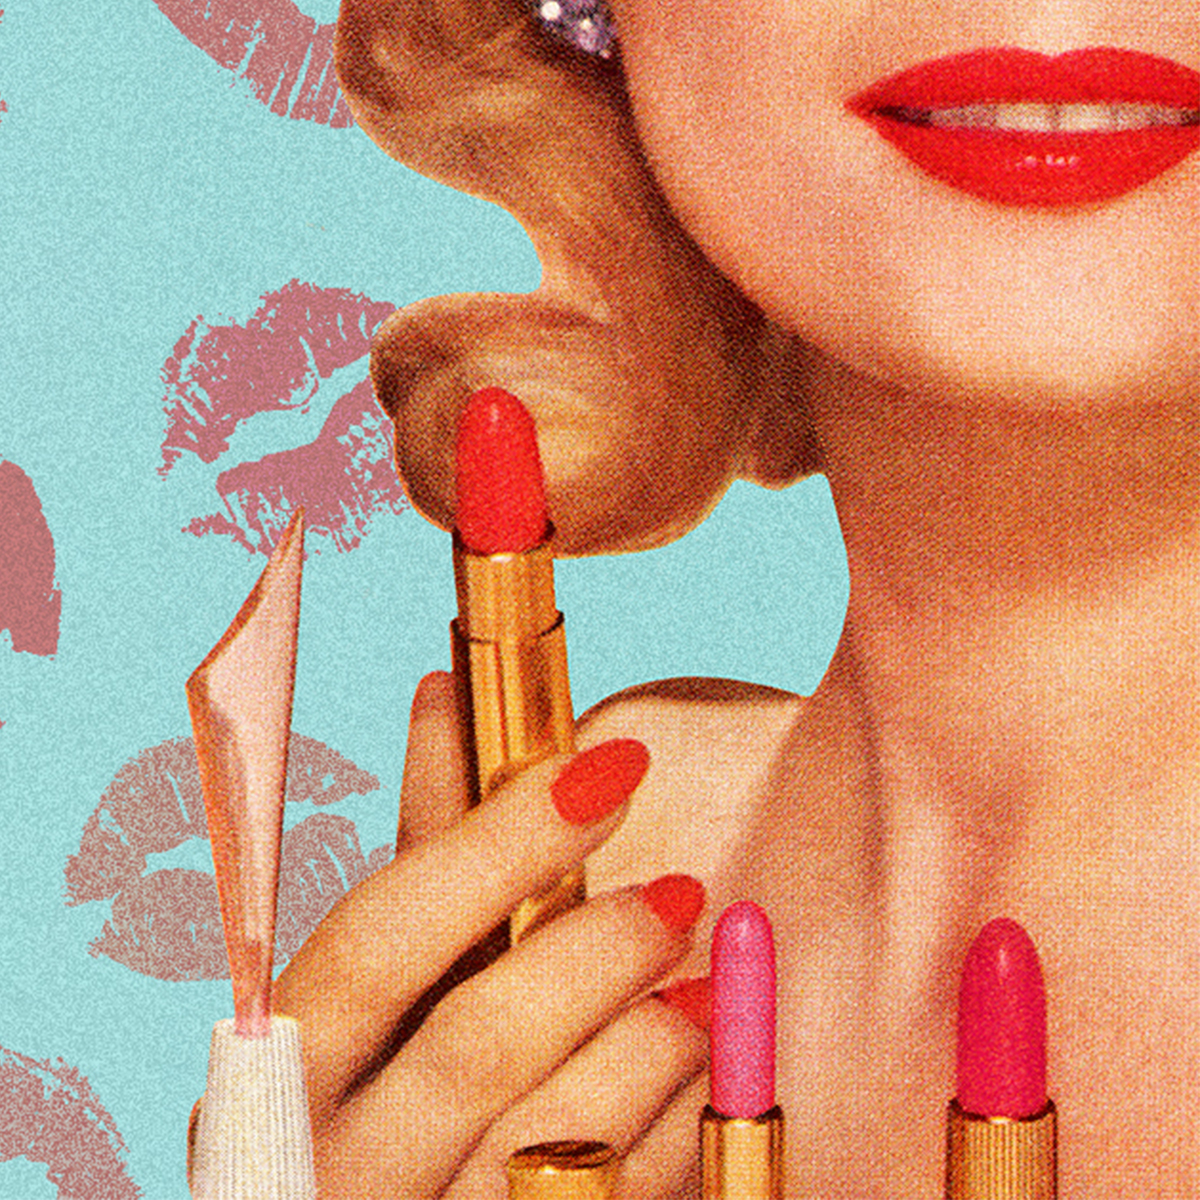 The Strength and Vitality of the Red Lipstick